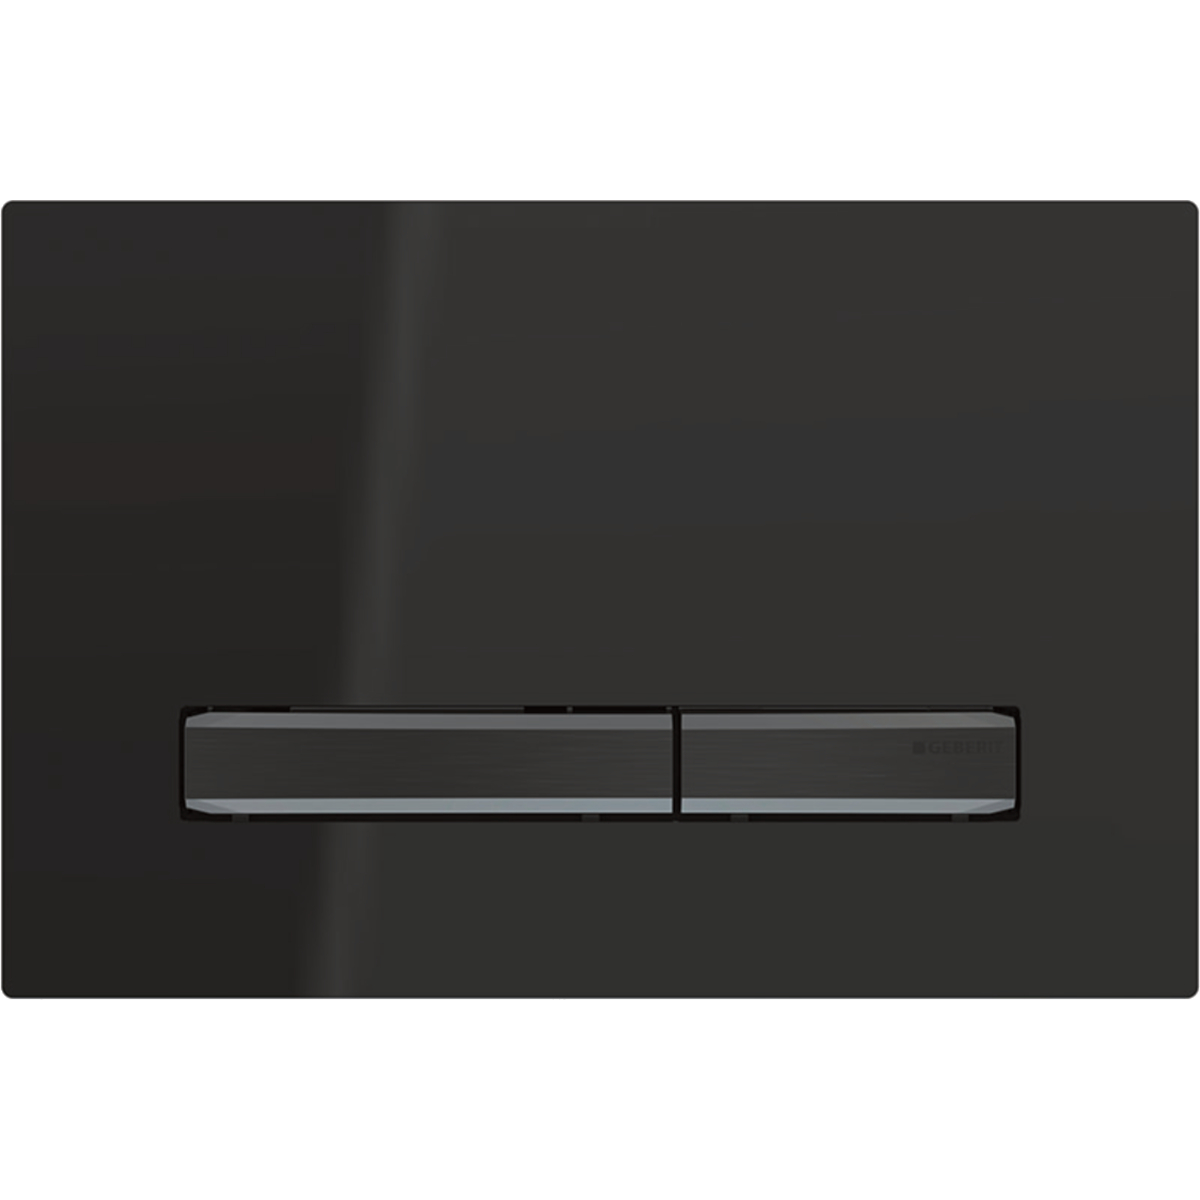 Geberit 115.671.DW.2 Actuator Plate Sigma50 for Dual Flush, Metal Colour Black Chrome - Base Plate and Buttons: Black Chrome/Cover Plate: Black